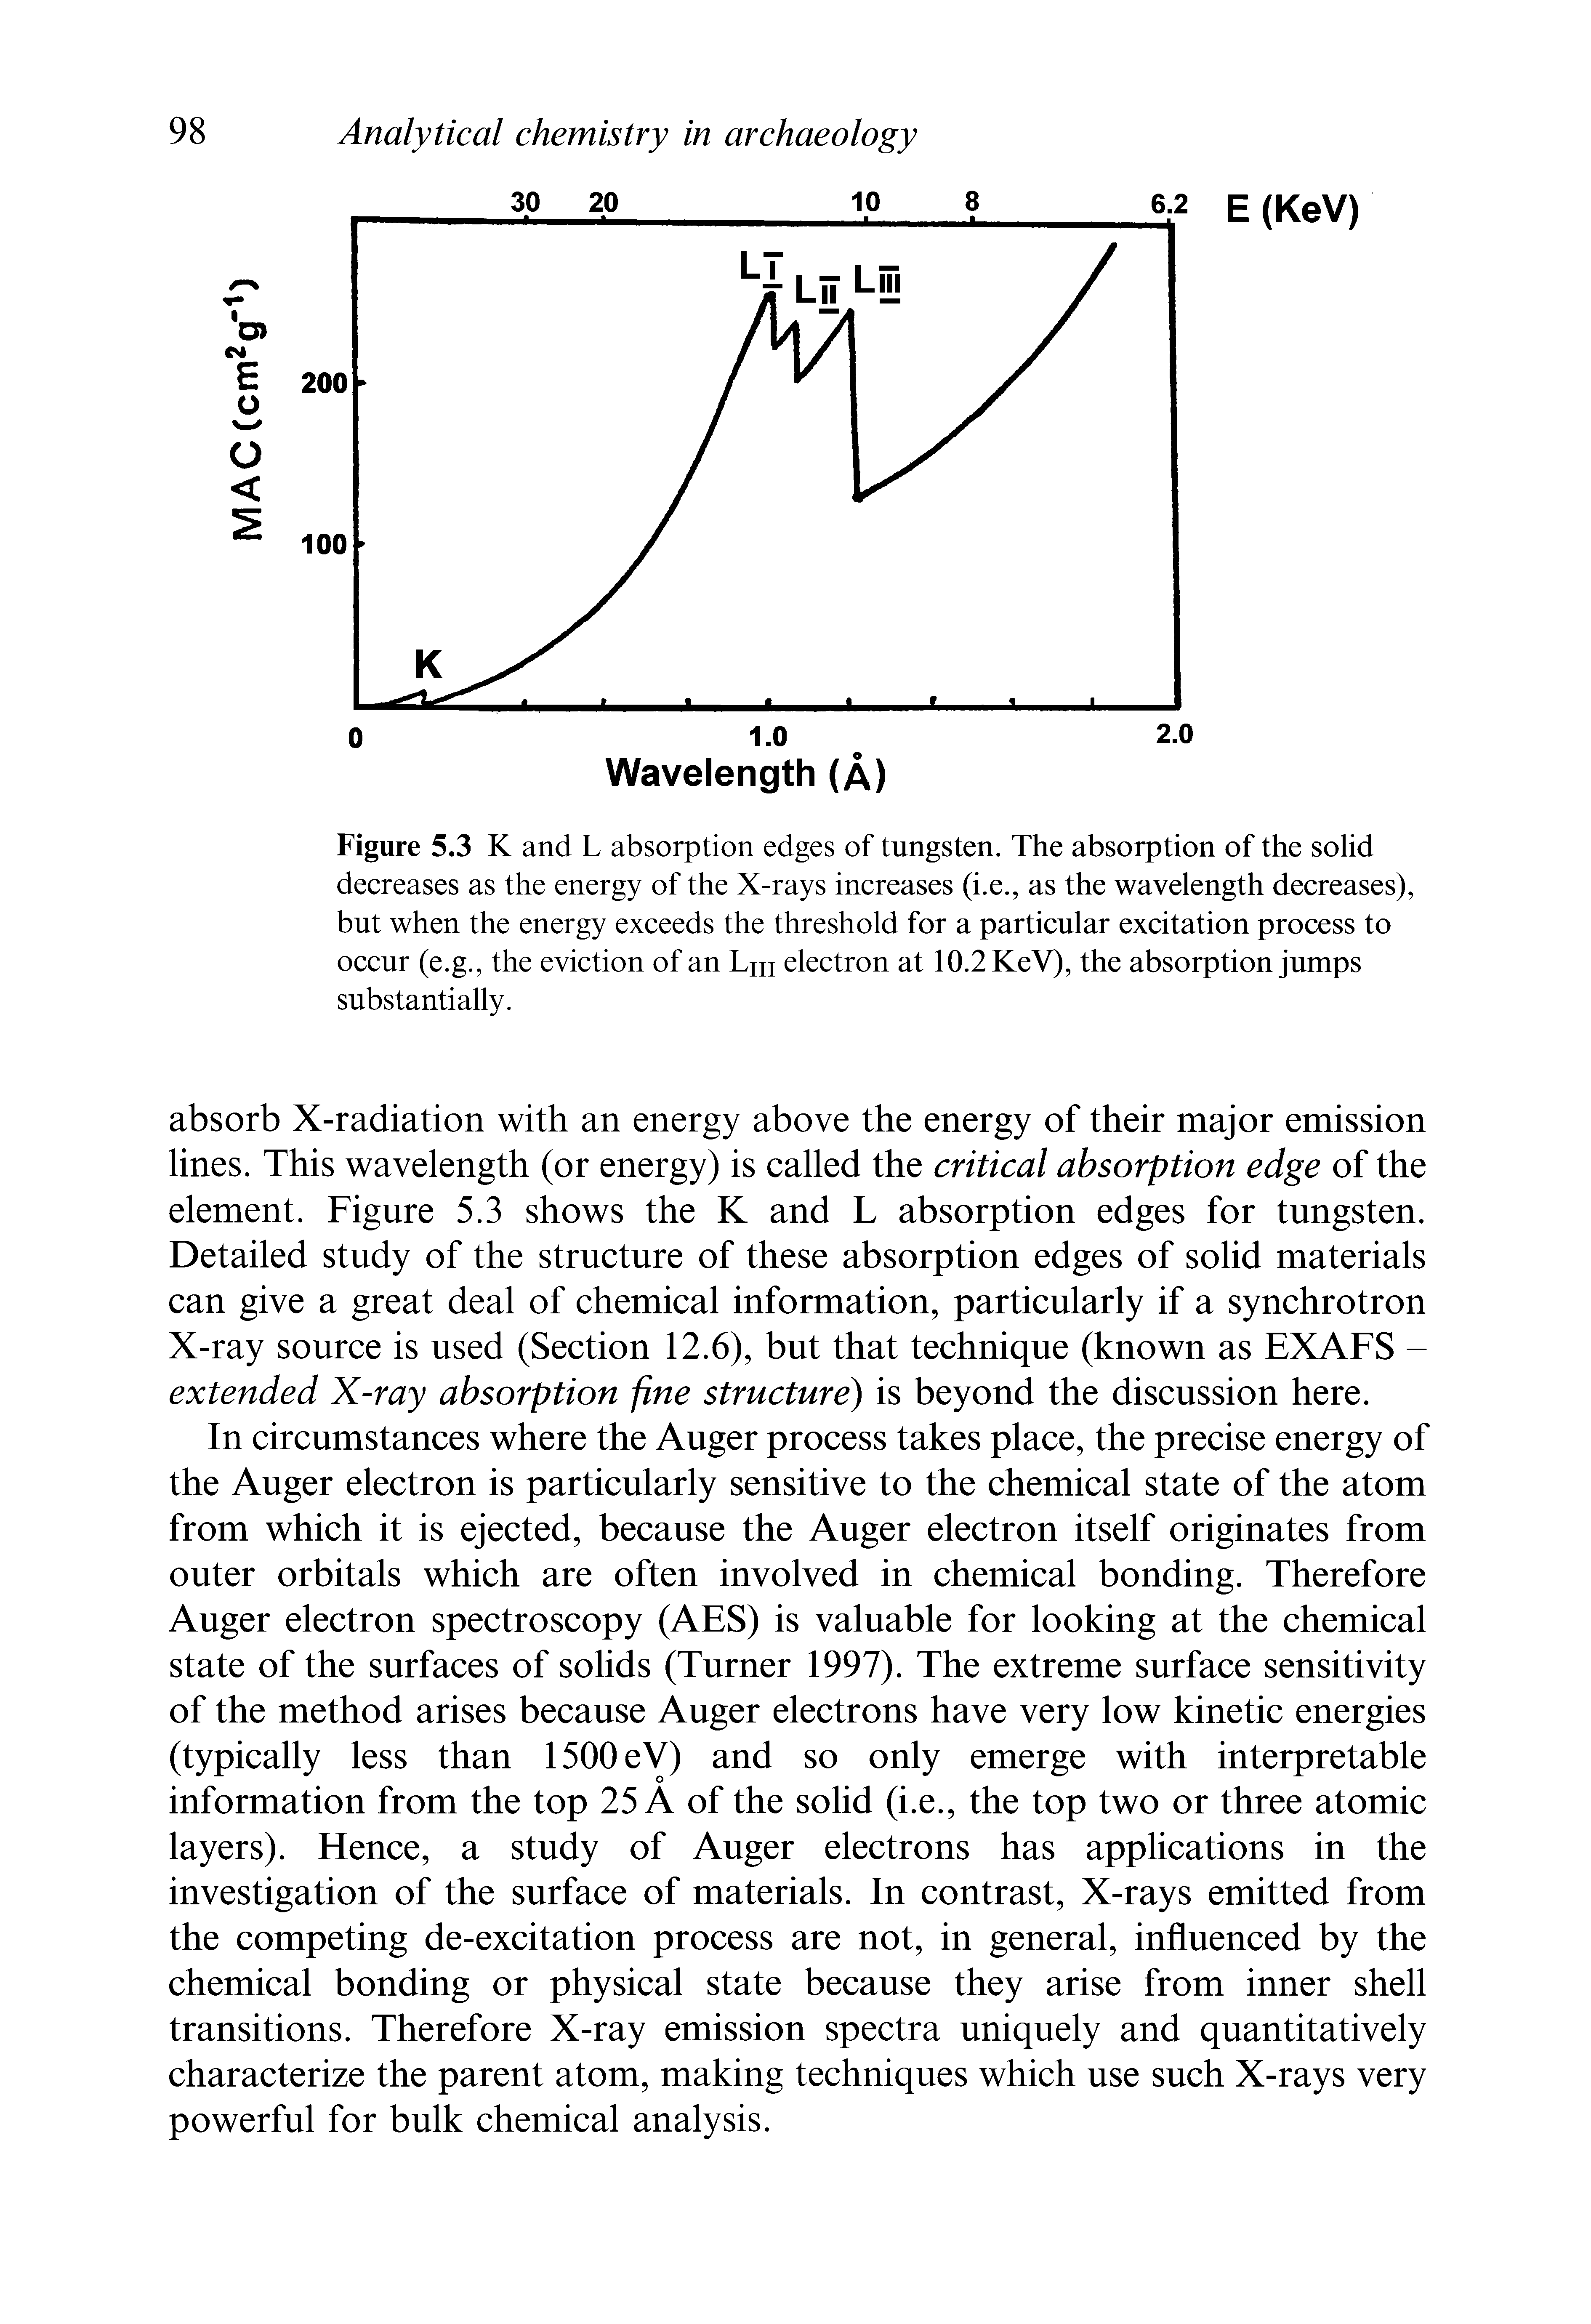 Figure 5.3 K and L absorption edges of tungsten. The absorption of the solid decreases as the energy of the X-rays increases (i.e., as the wavelength decreases), but when the energy exceeds the threshold for a particular excitation process to occur (e.g., the eviction of an Lm electron at 10.2 KeV), the absorption jumps substantially.